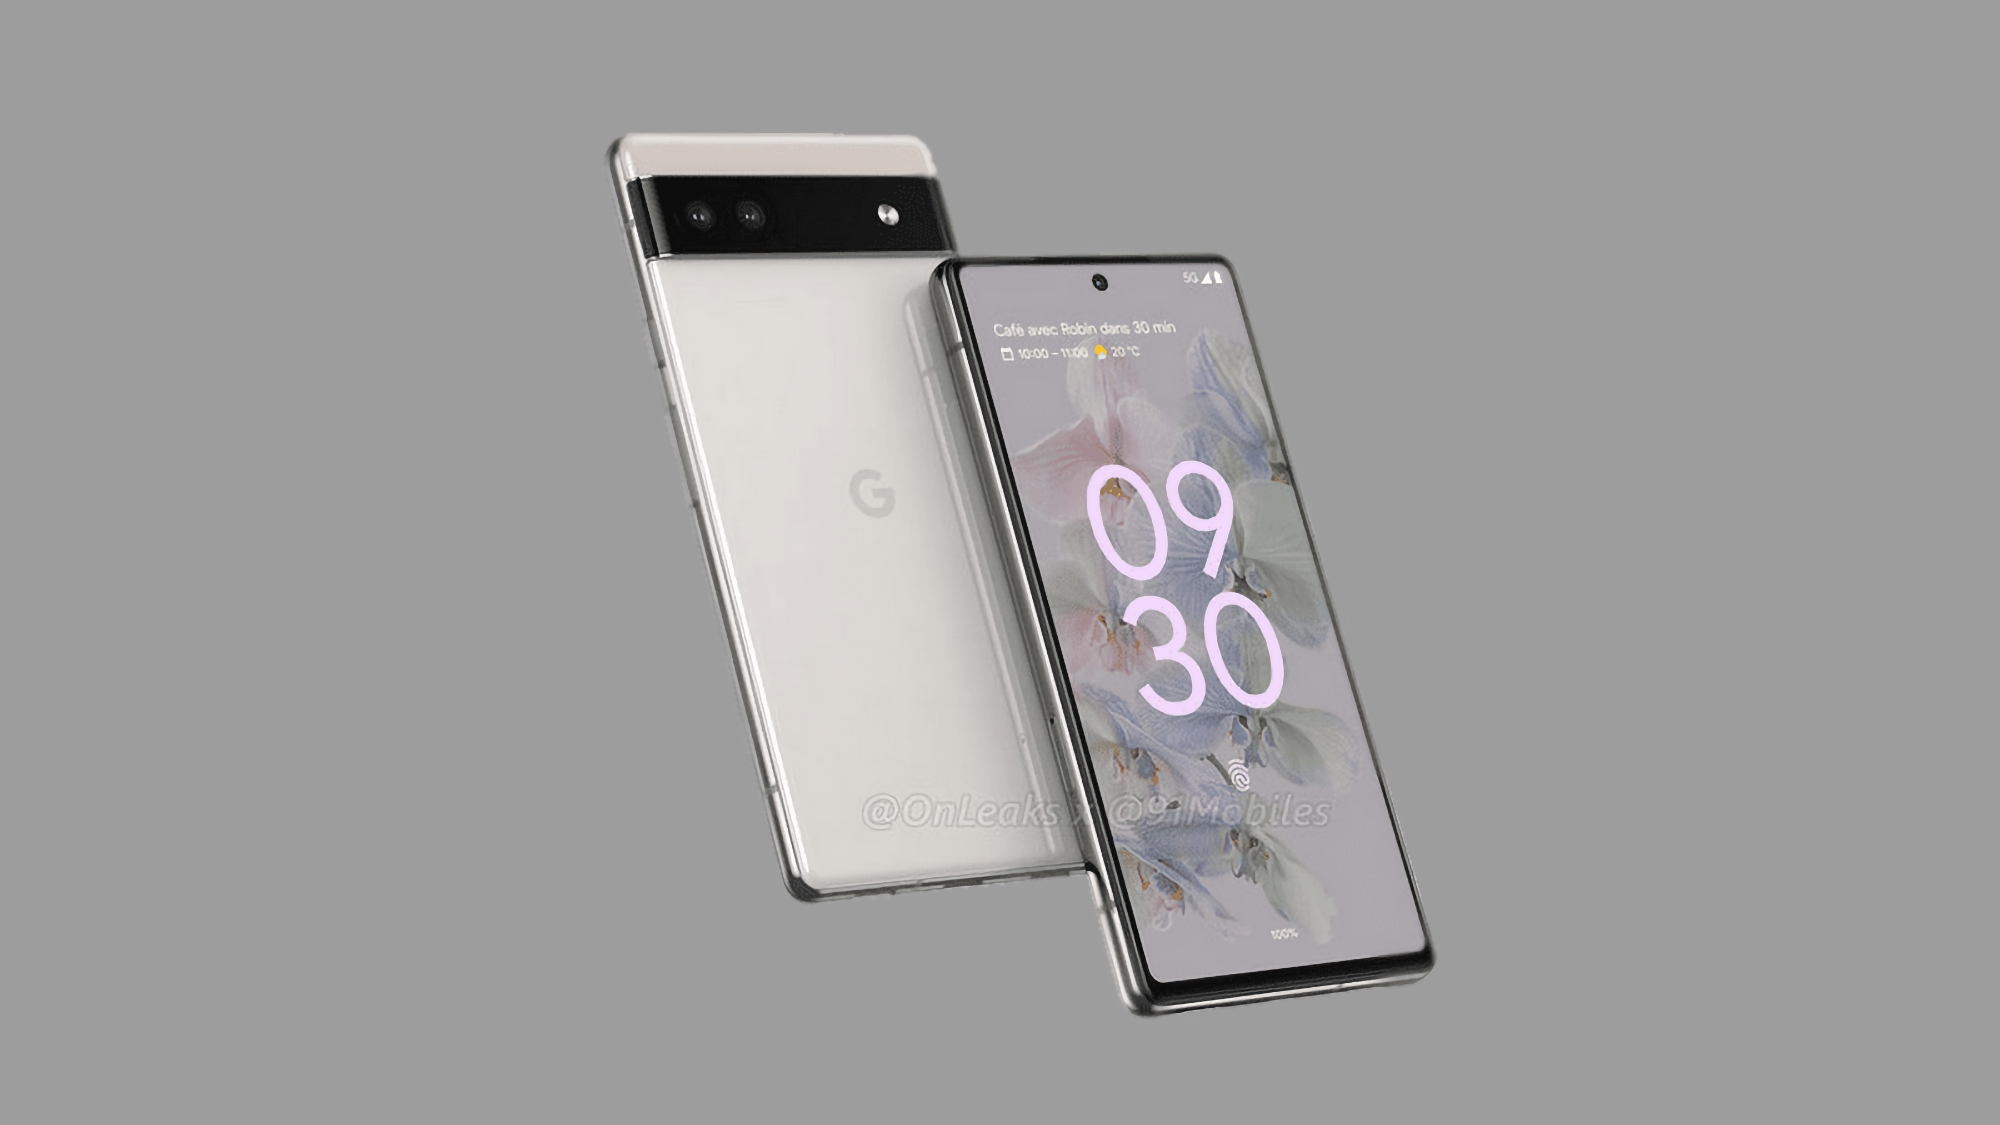 90Hz OLED screen, Tensor chip, 25W charging and Pixel 5-like camera: Detailed Google Pixel 6a specs leak online